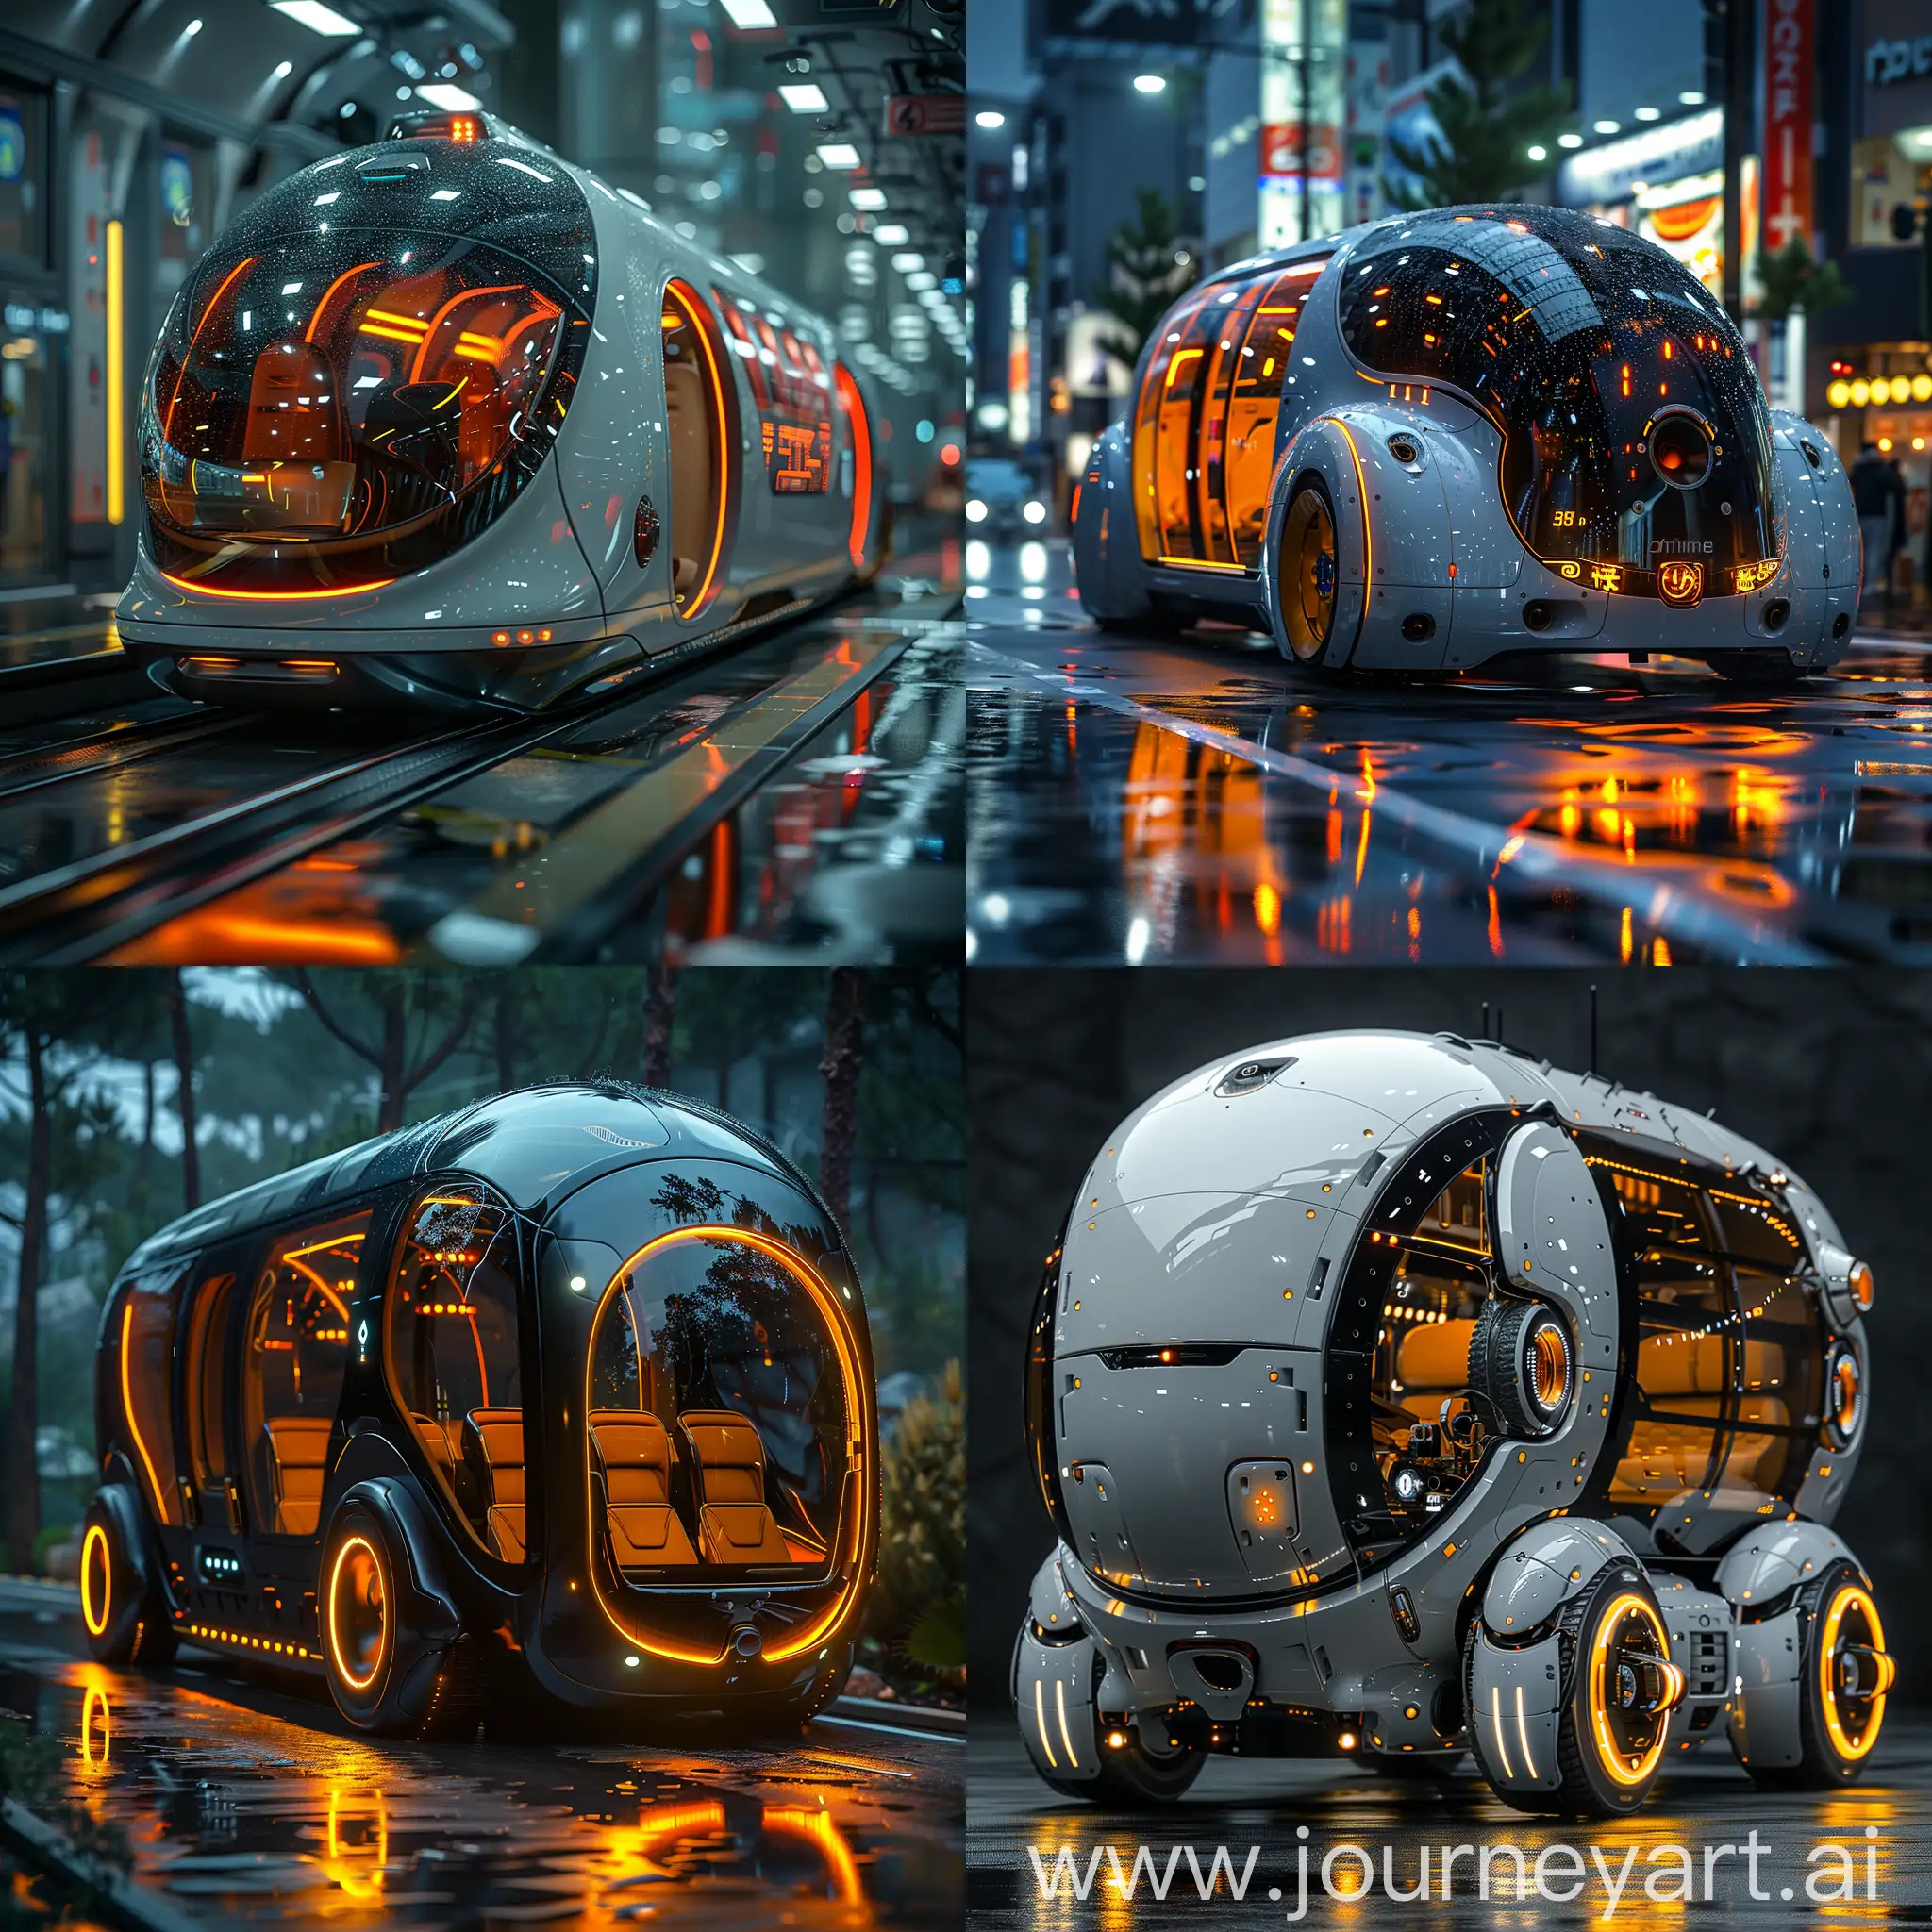 Futuristic bus:: sci-fi style, science fiction, Autonomous Driving, Electric Power, Smart Seating, Augmented Reality Windows, Self-cleaning Surfaces, Biometric Identification, Energy-efficient Design, Multi-functional Interior, Connectivity, Environmental Monitoring System, Reinforced Chassis, Impact-Resistant Windows, Roll Cage Structure, Crash Avoidance Technology, Fire Suppression System, Anti-Collision Sensors, Reinforced Doors, All-Terrain Capabilities, Emergency Exit Features, Structural Integrity Testing, octane render --stylize 1000